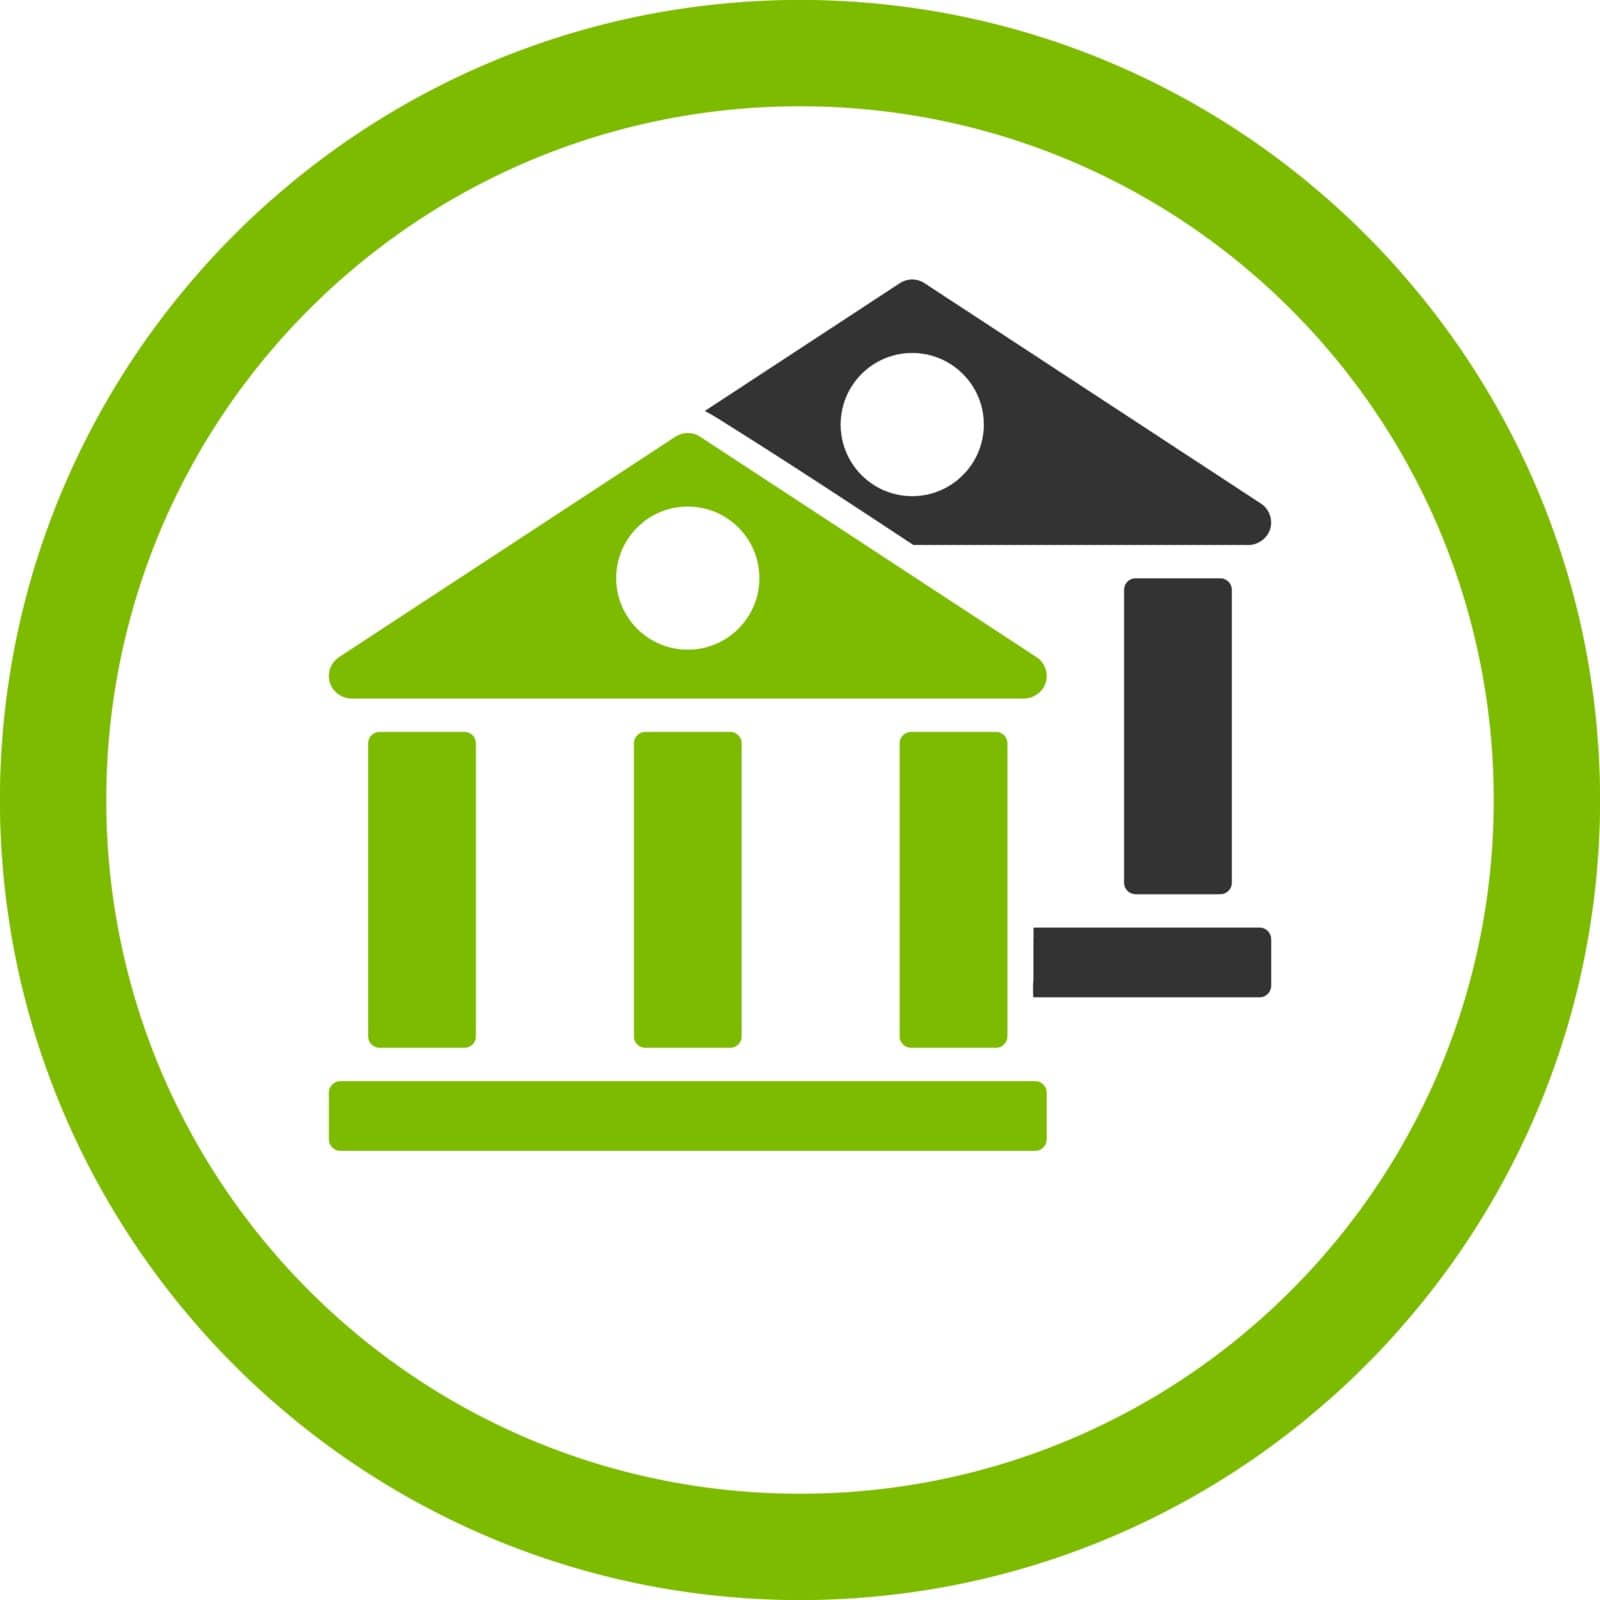 Banks vector icon. This flat rounded symbol uses eco green and gray colors and isolated on a white background.